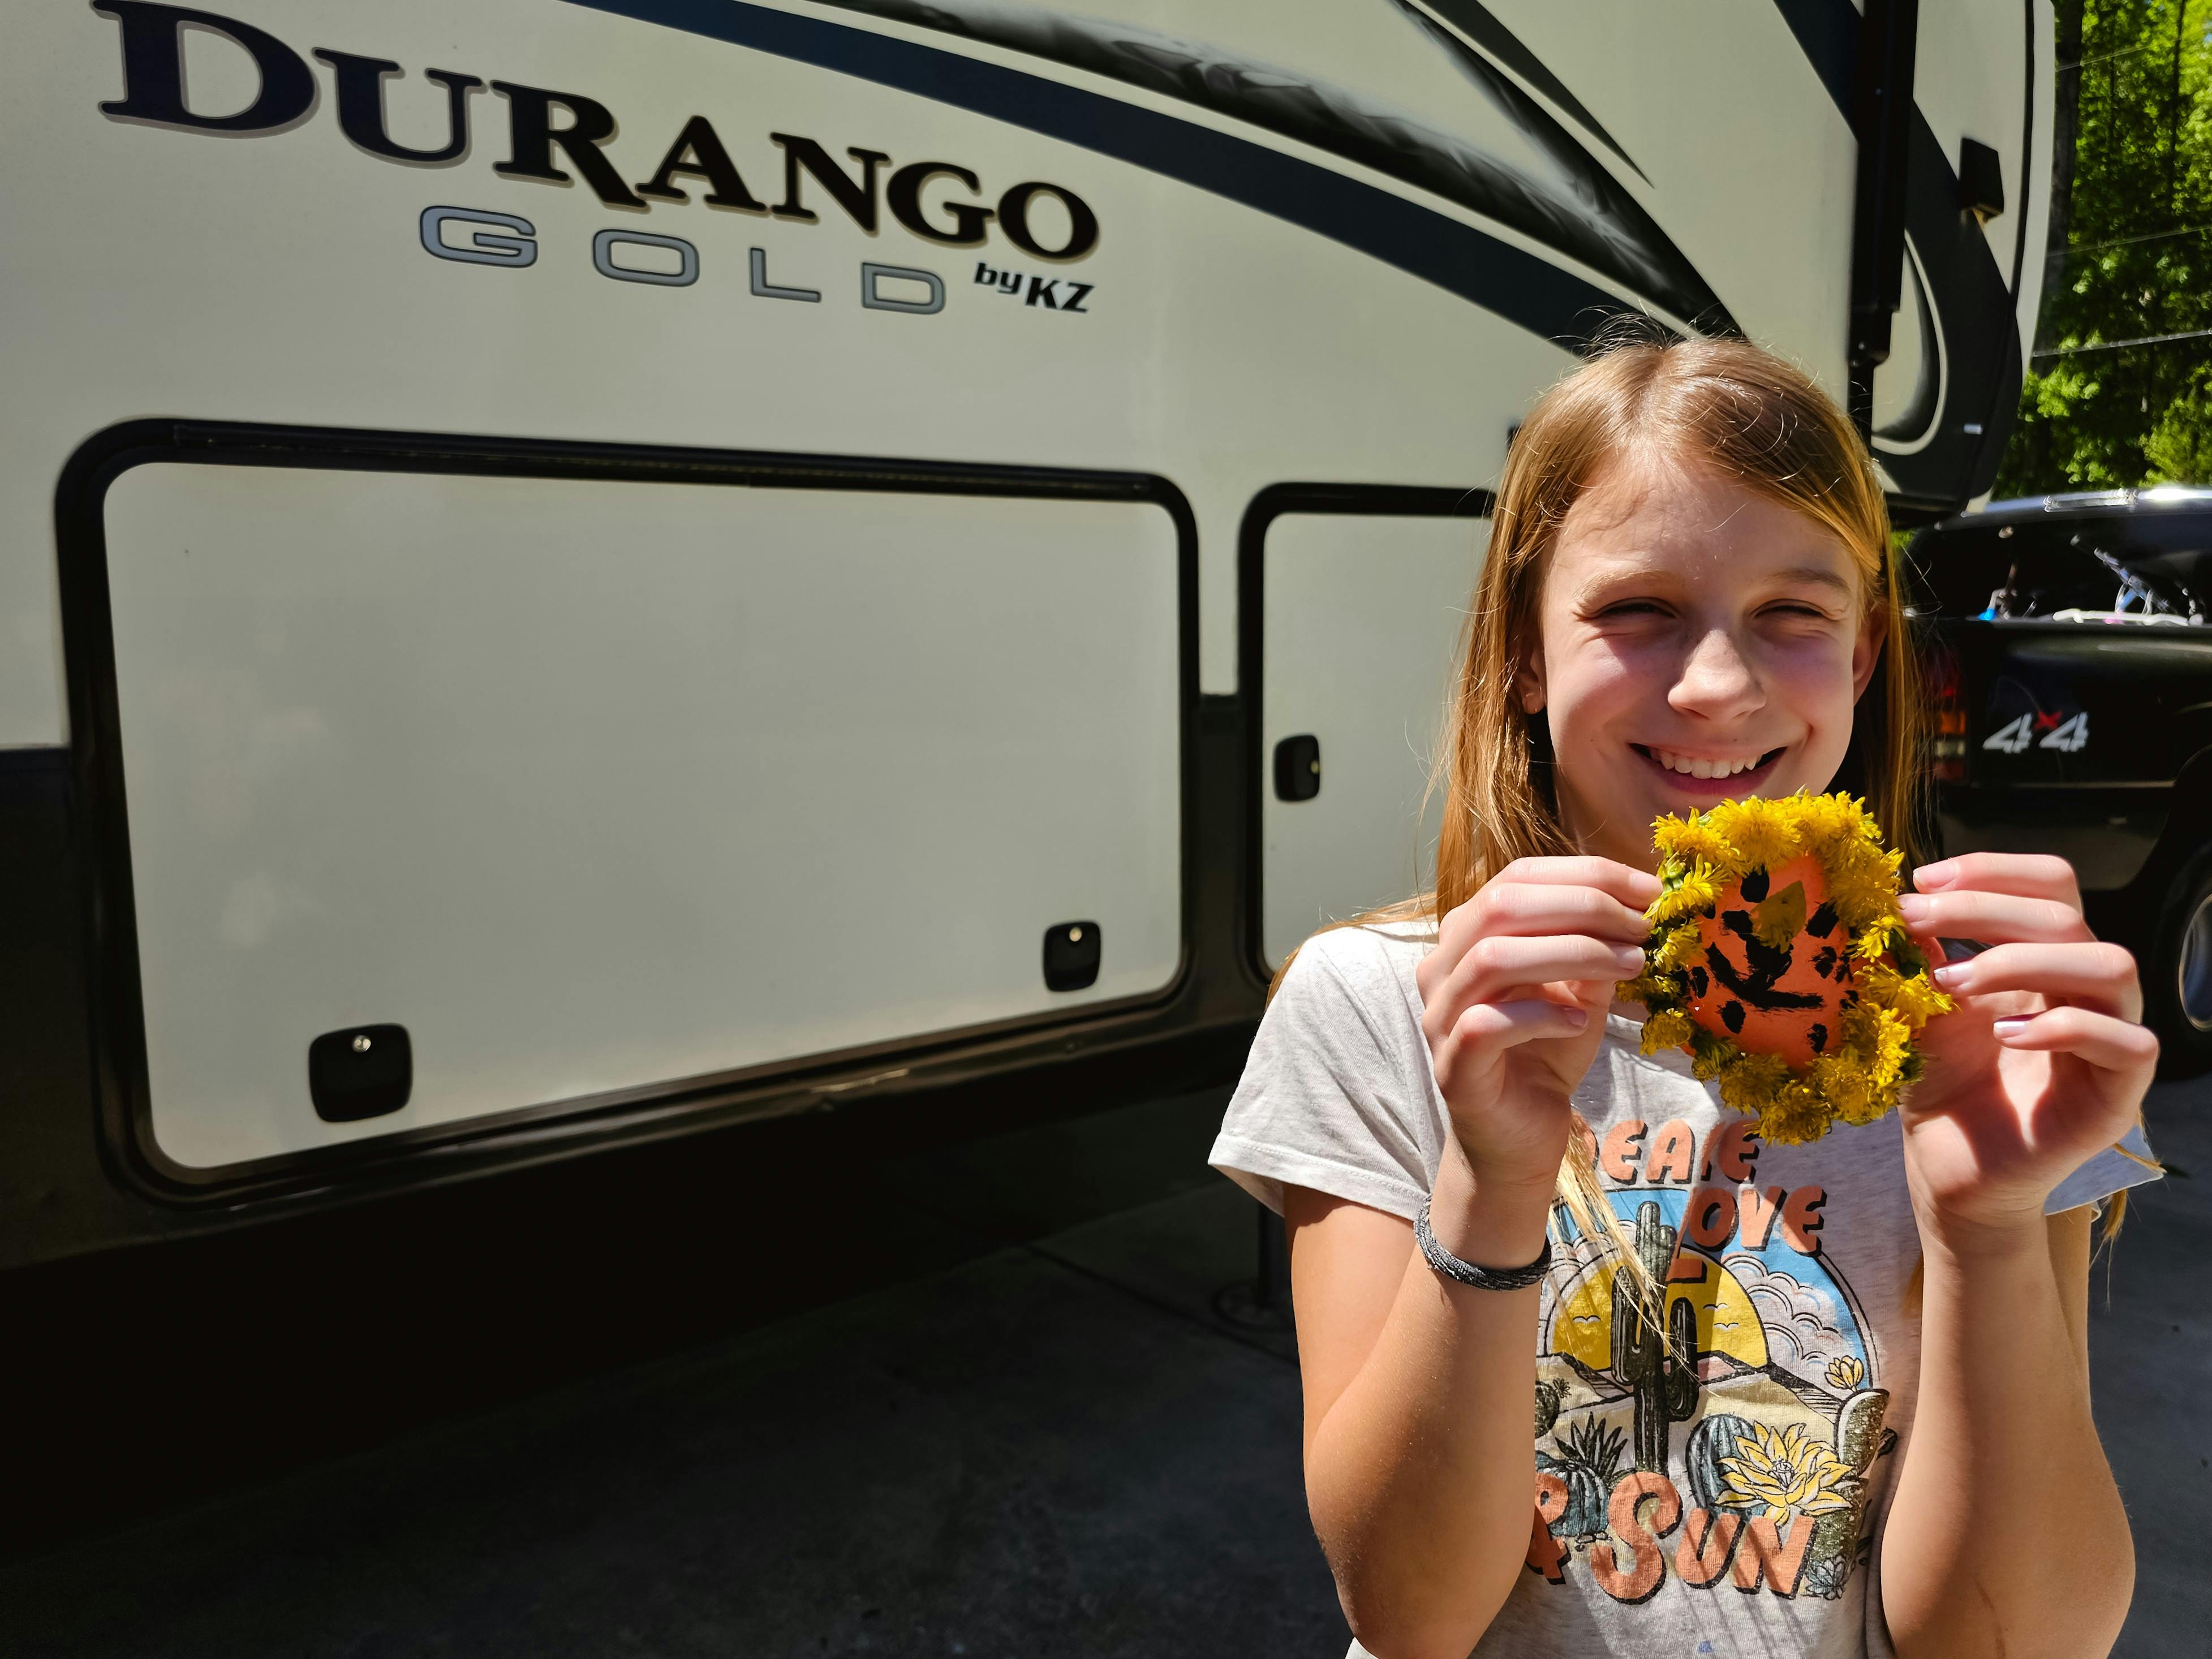 One of the Barringer kids showing off her dande-lion craft next to her KZ Durango Gold fifth wheel.